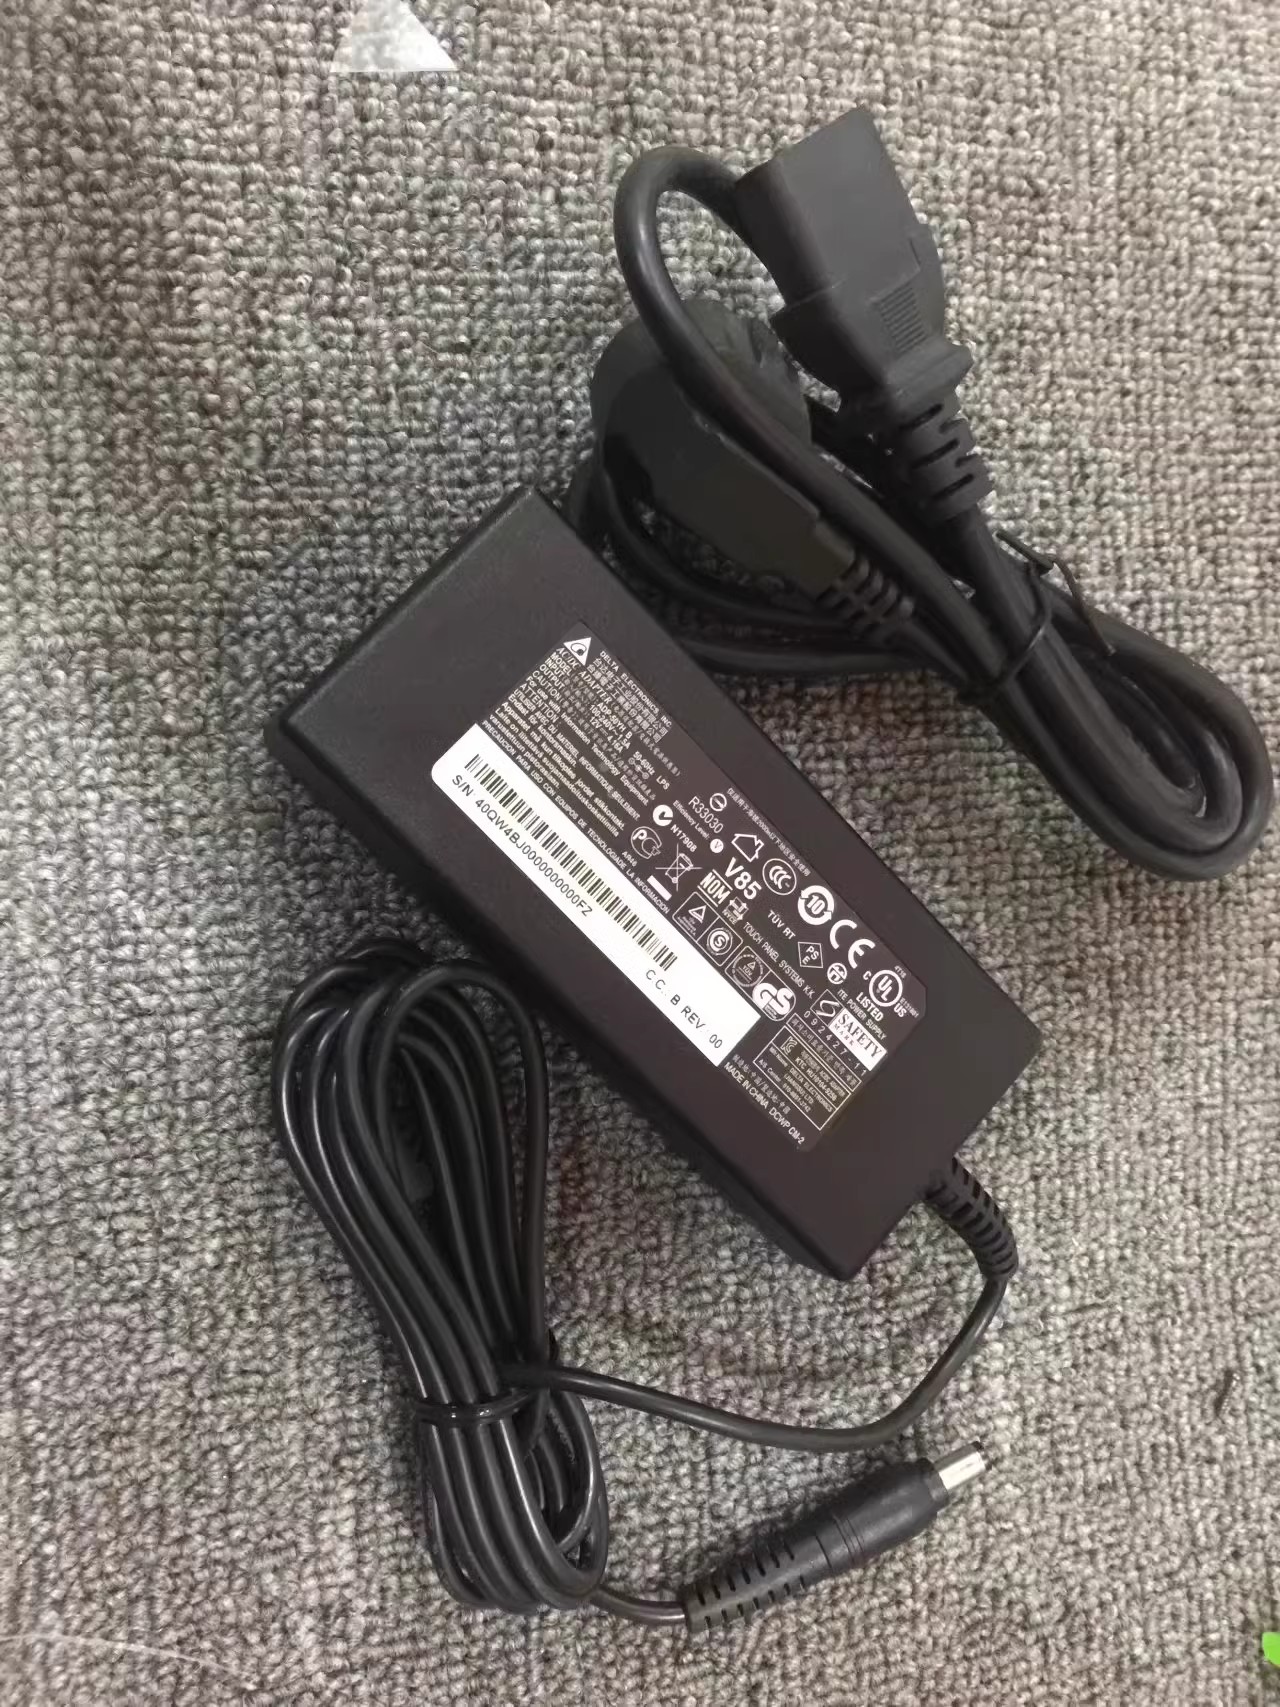 *Brand NEW*DC12V 4.16A 50W AC ADAPTER ADP-50YHB Power Supply